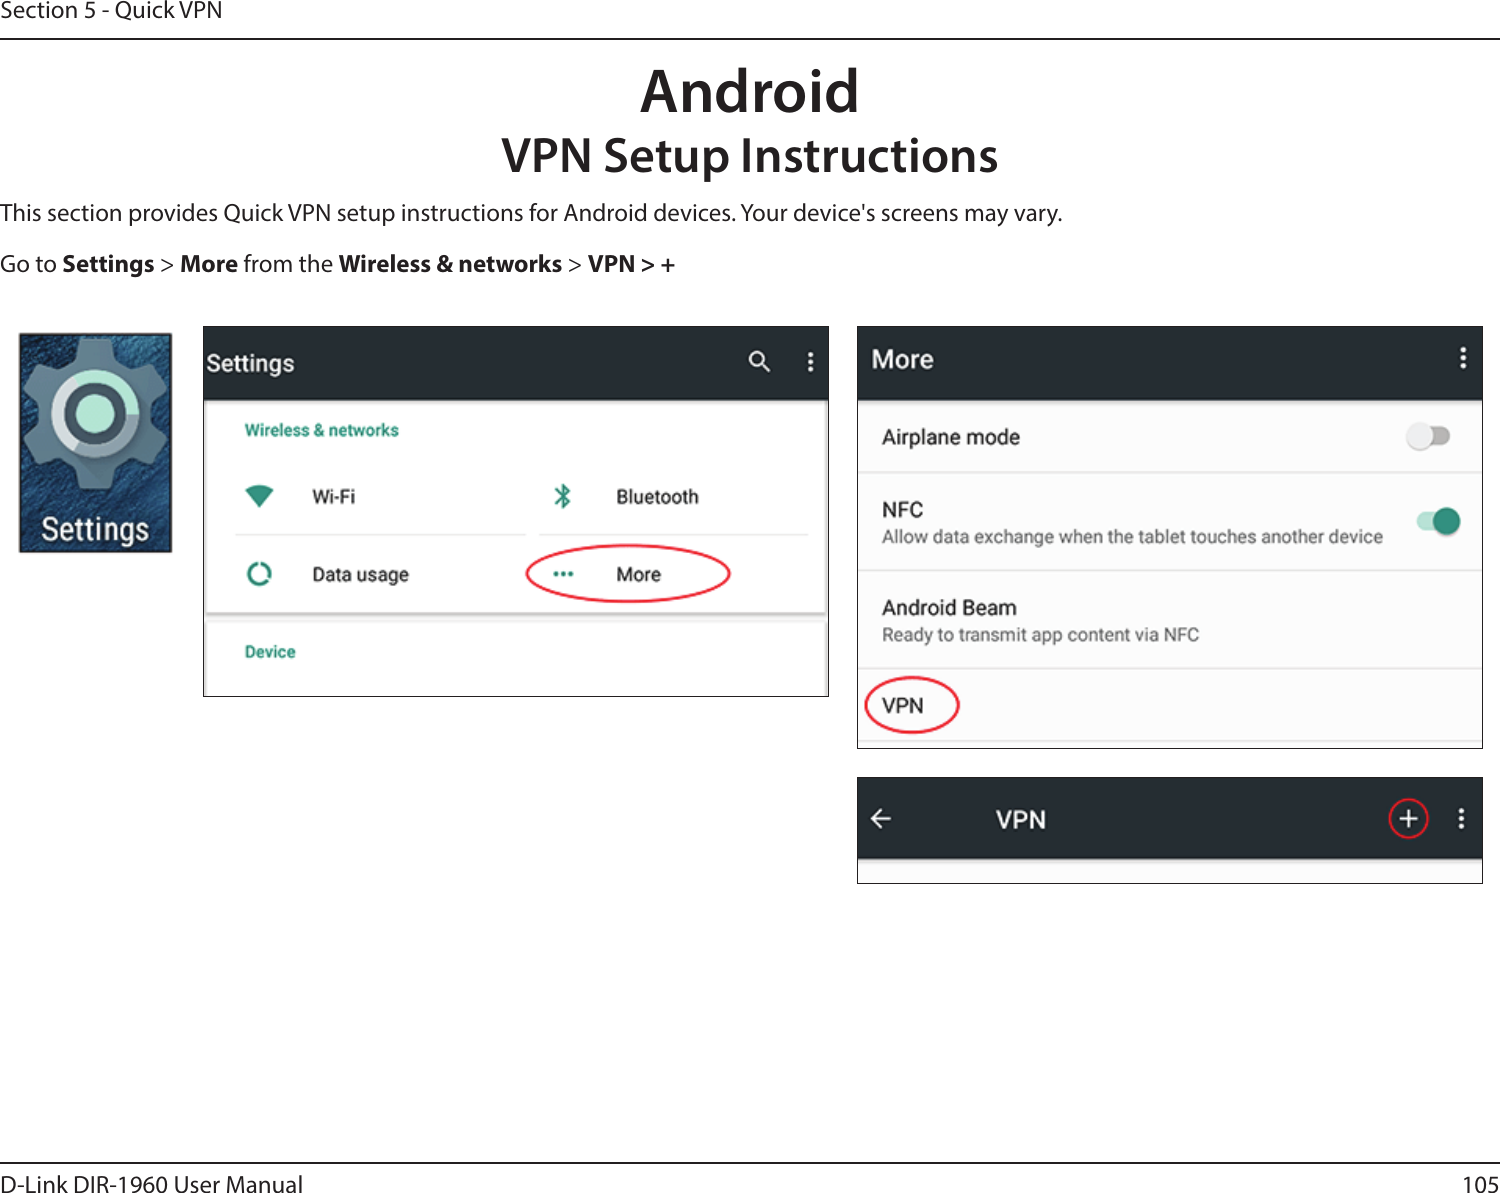 105D-Link DIR-1960 User ManualSection 5 - Quick VPNThis section provides Quick VPN setup instructions for Android devices. Your device&apos;s screens may vary.Go to Settings &gt; More from the Wireless &amp; networks &gt; VPN &gt; +AndroidVPN Setup Instructions